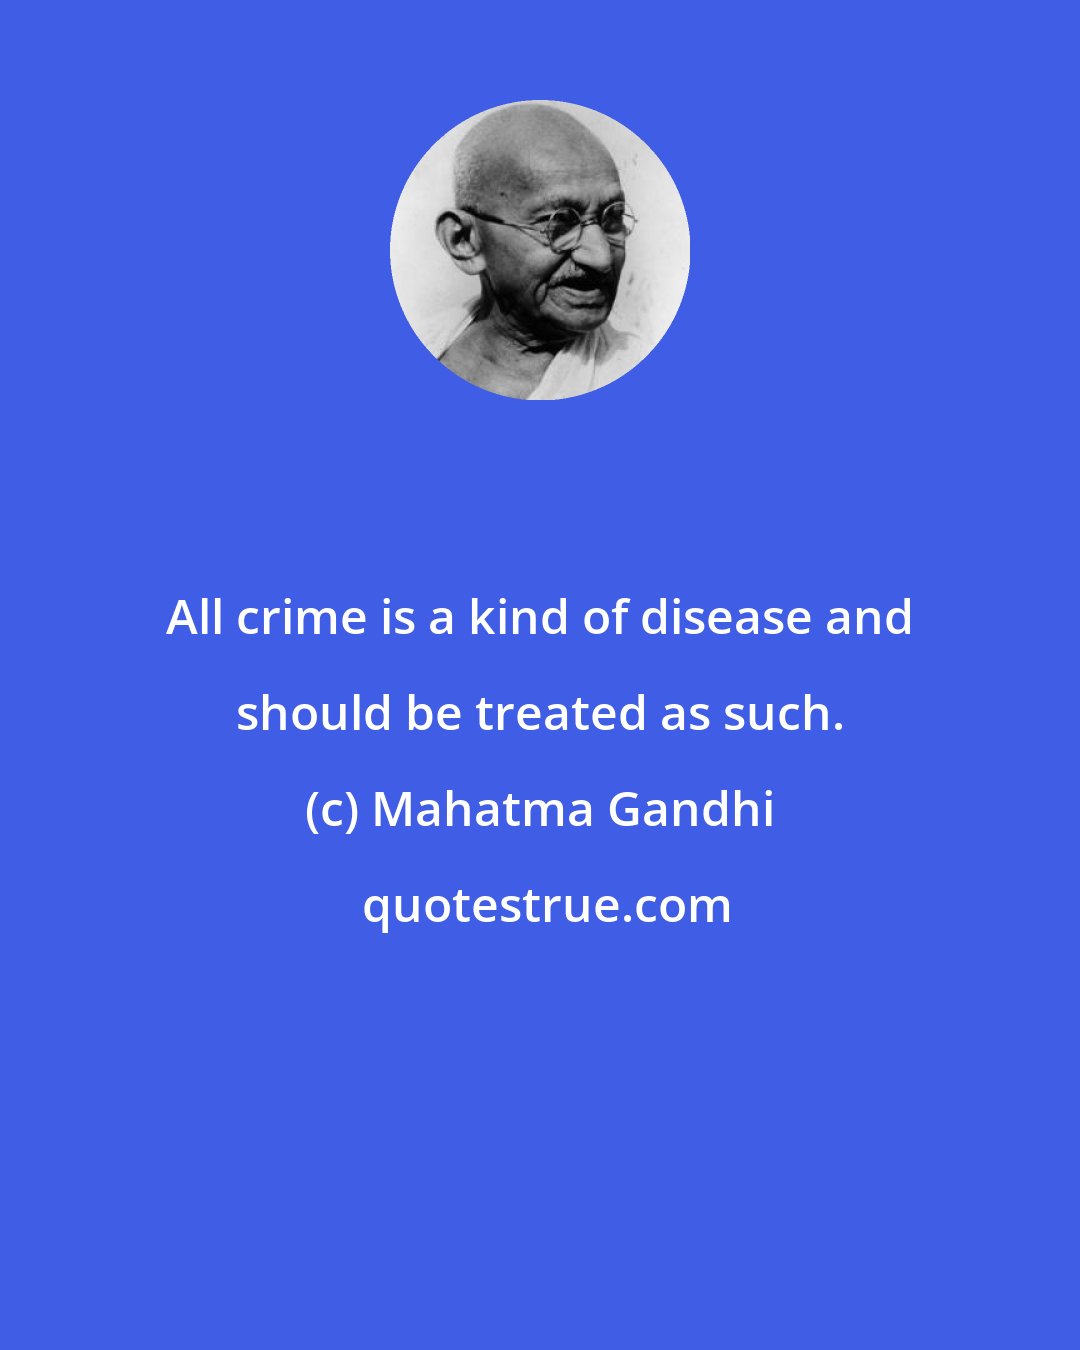 Mahatma Gandhi: All crime is a kind of disease and should be treated as such.